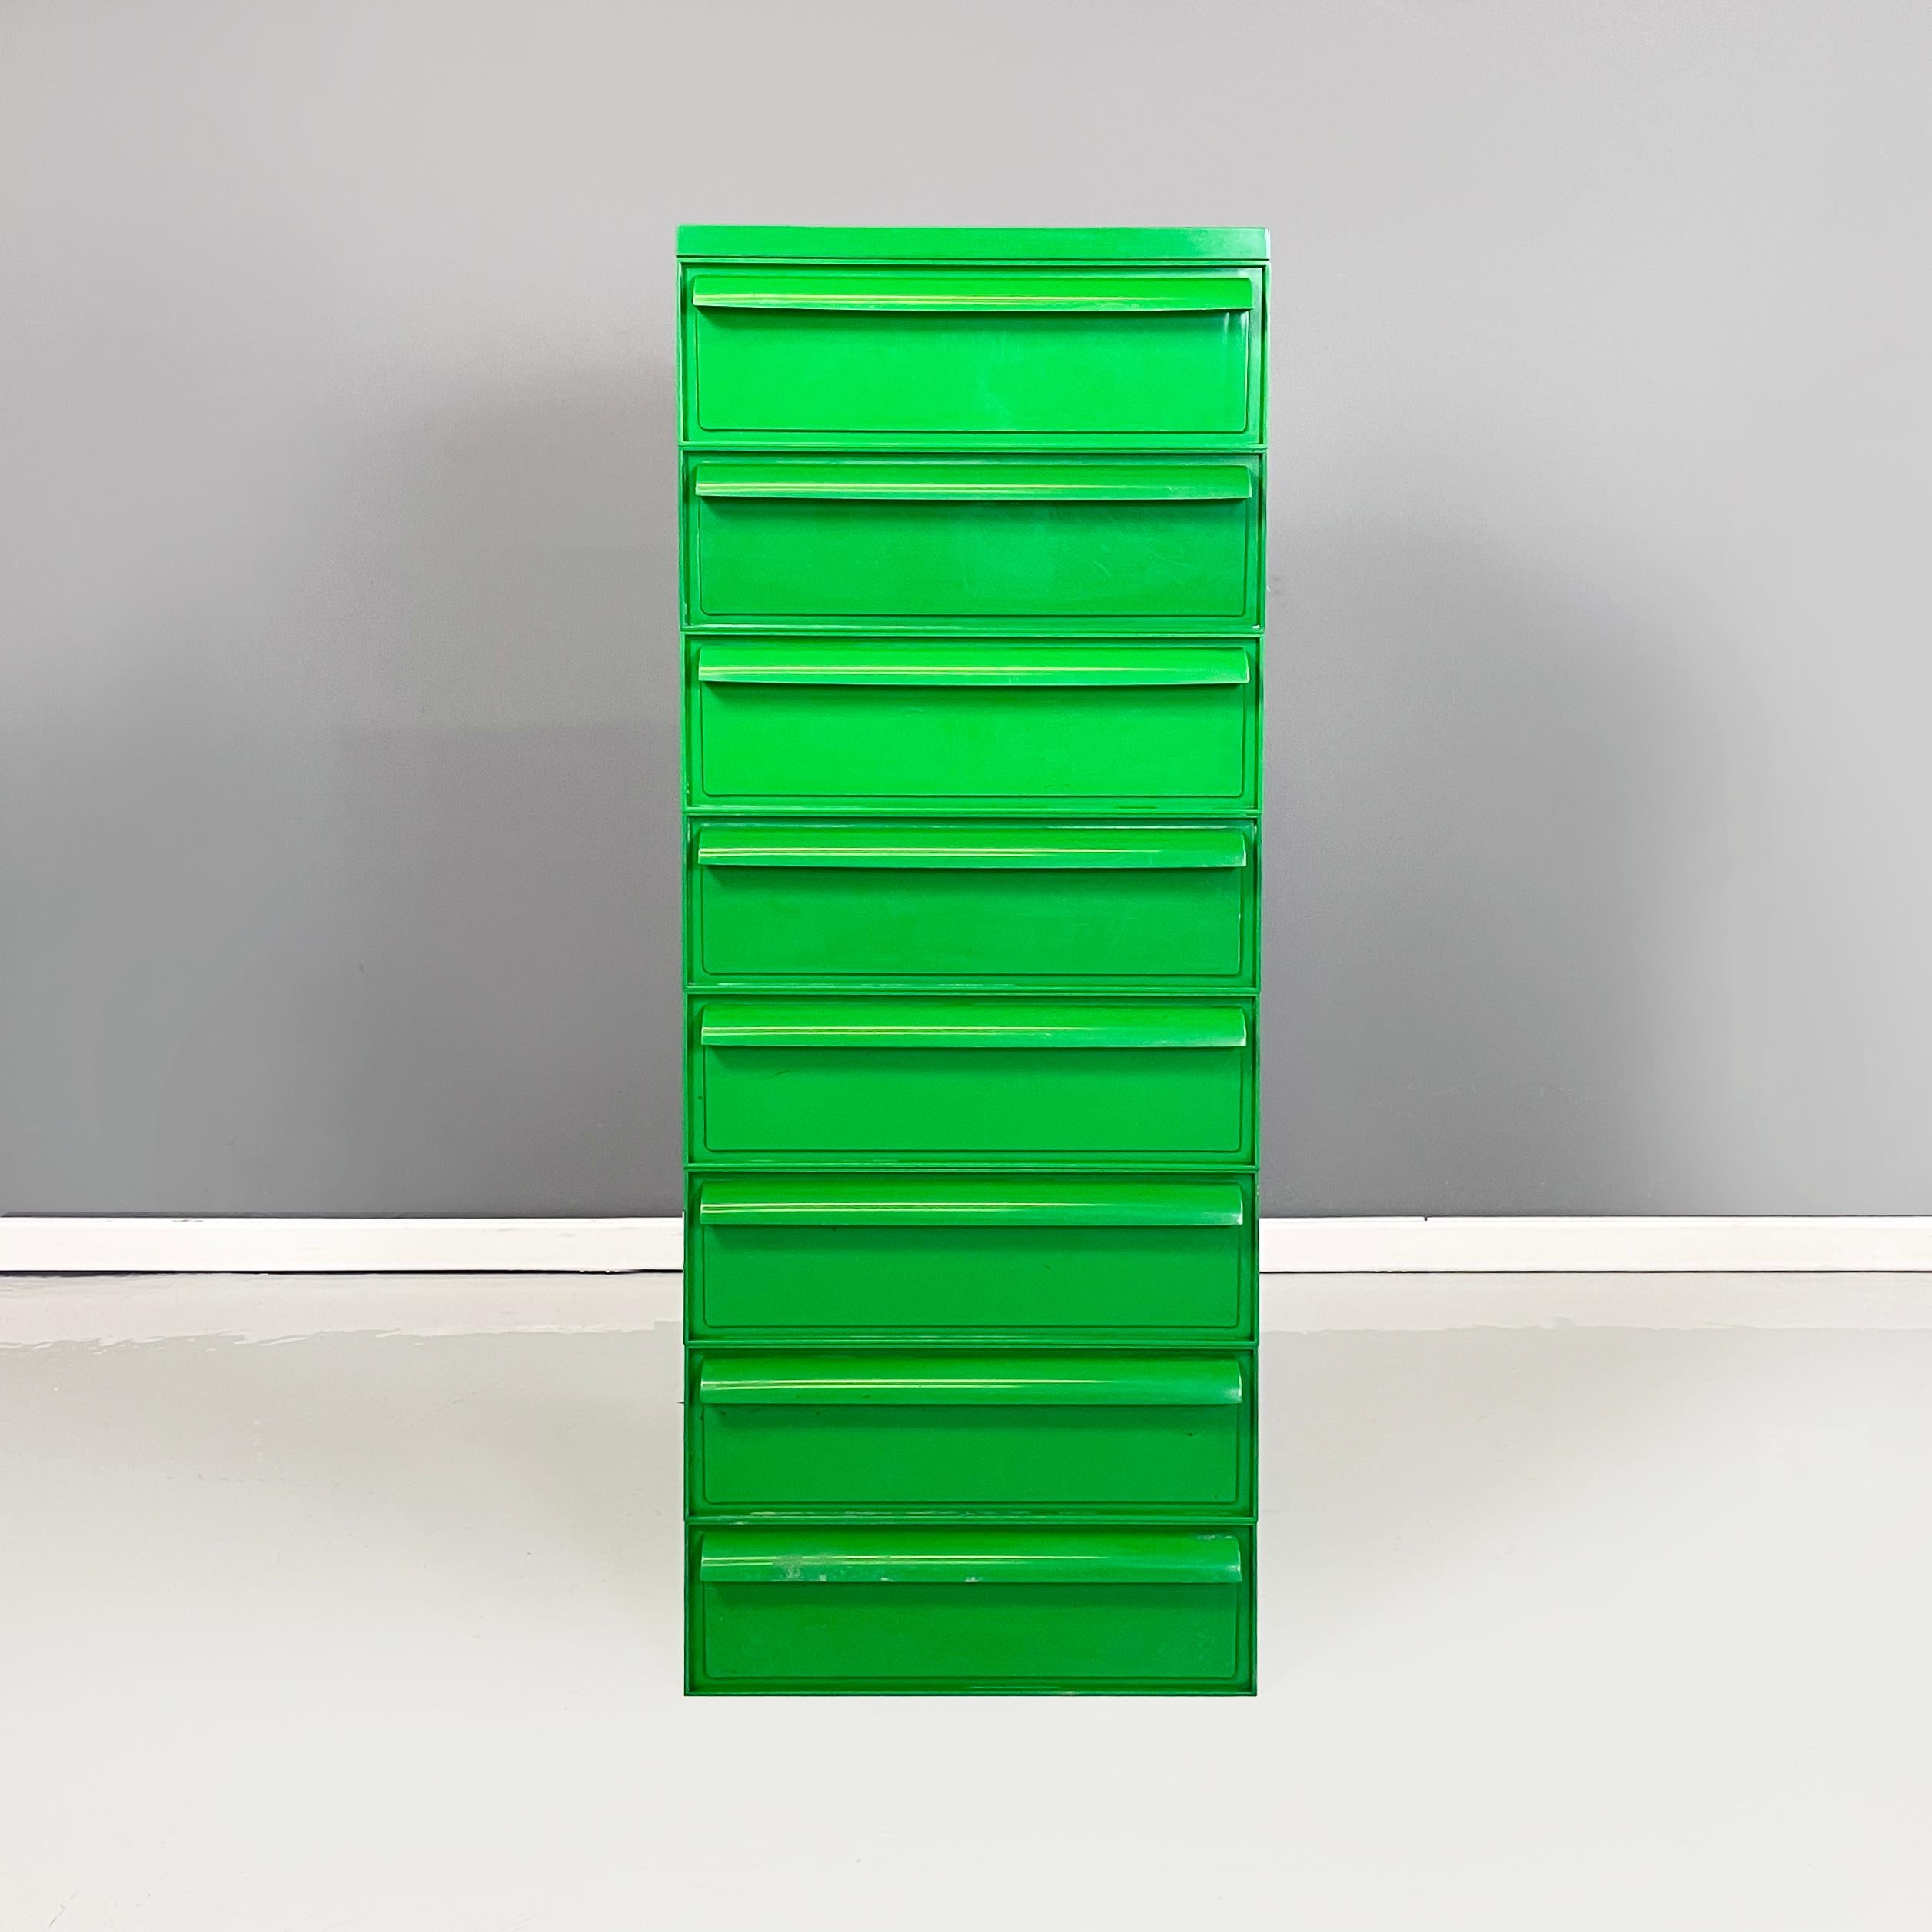 Italian Space Age Modular chest of drawers 4602  by Simon Fussell for Kartell, 1970s
Modular chest of drawers mod. 4602 with a square base, entirely in bright green plastic. On the front it has 8 rectangular drawers with rounded handles.
Produced by